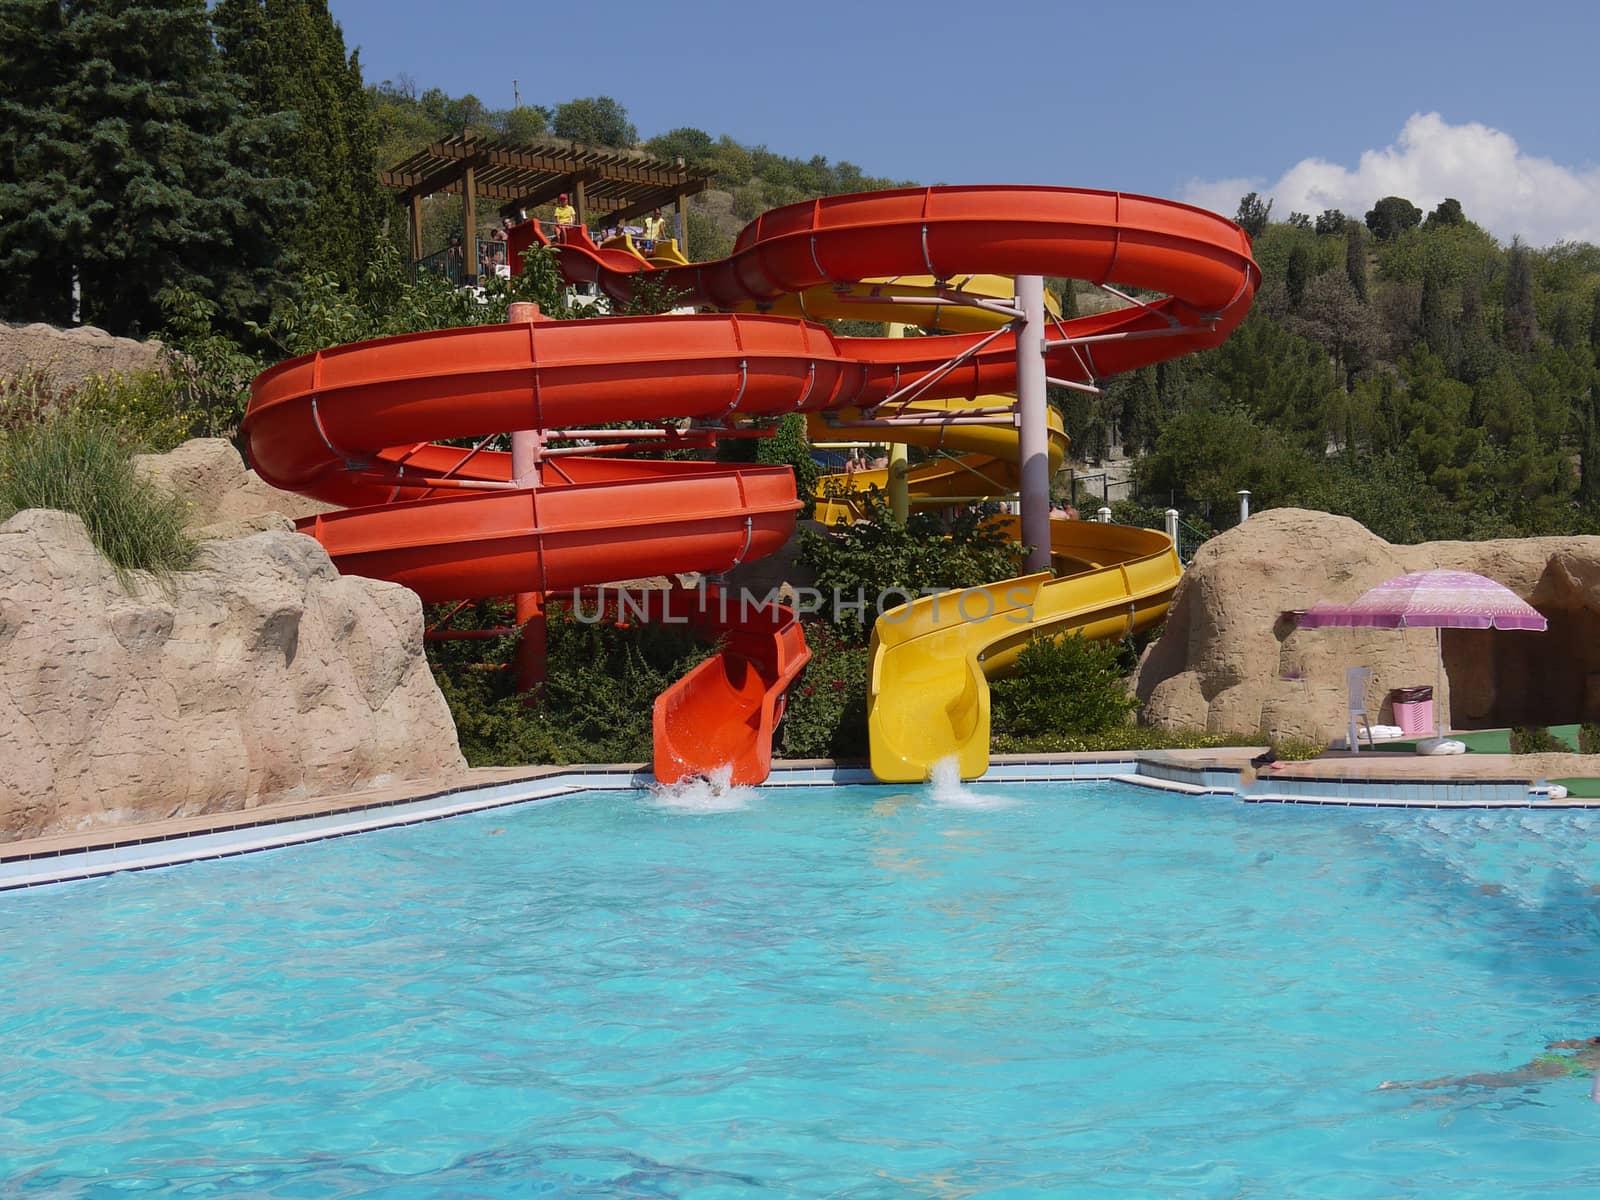 Children's slides in a park of different colors with a descent i by Adamchuk